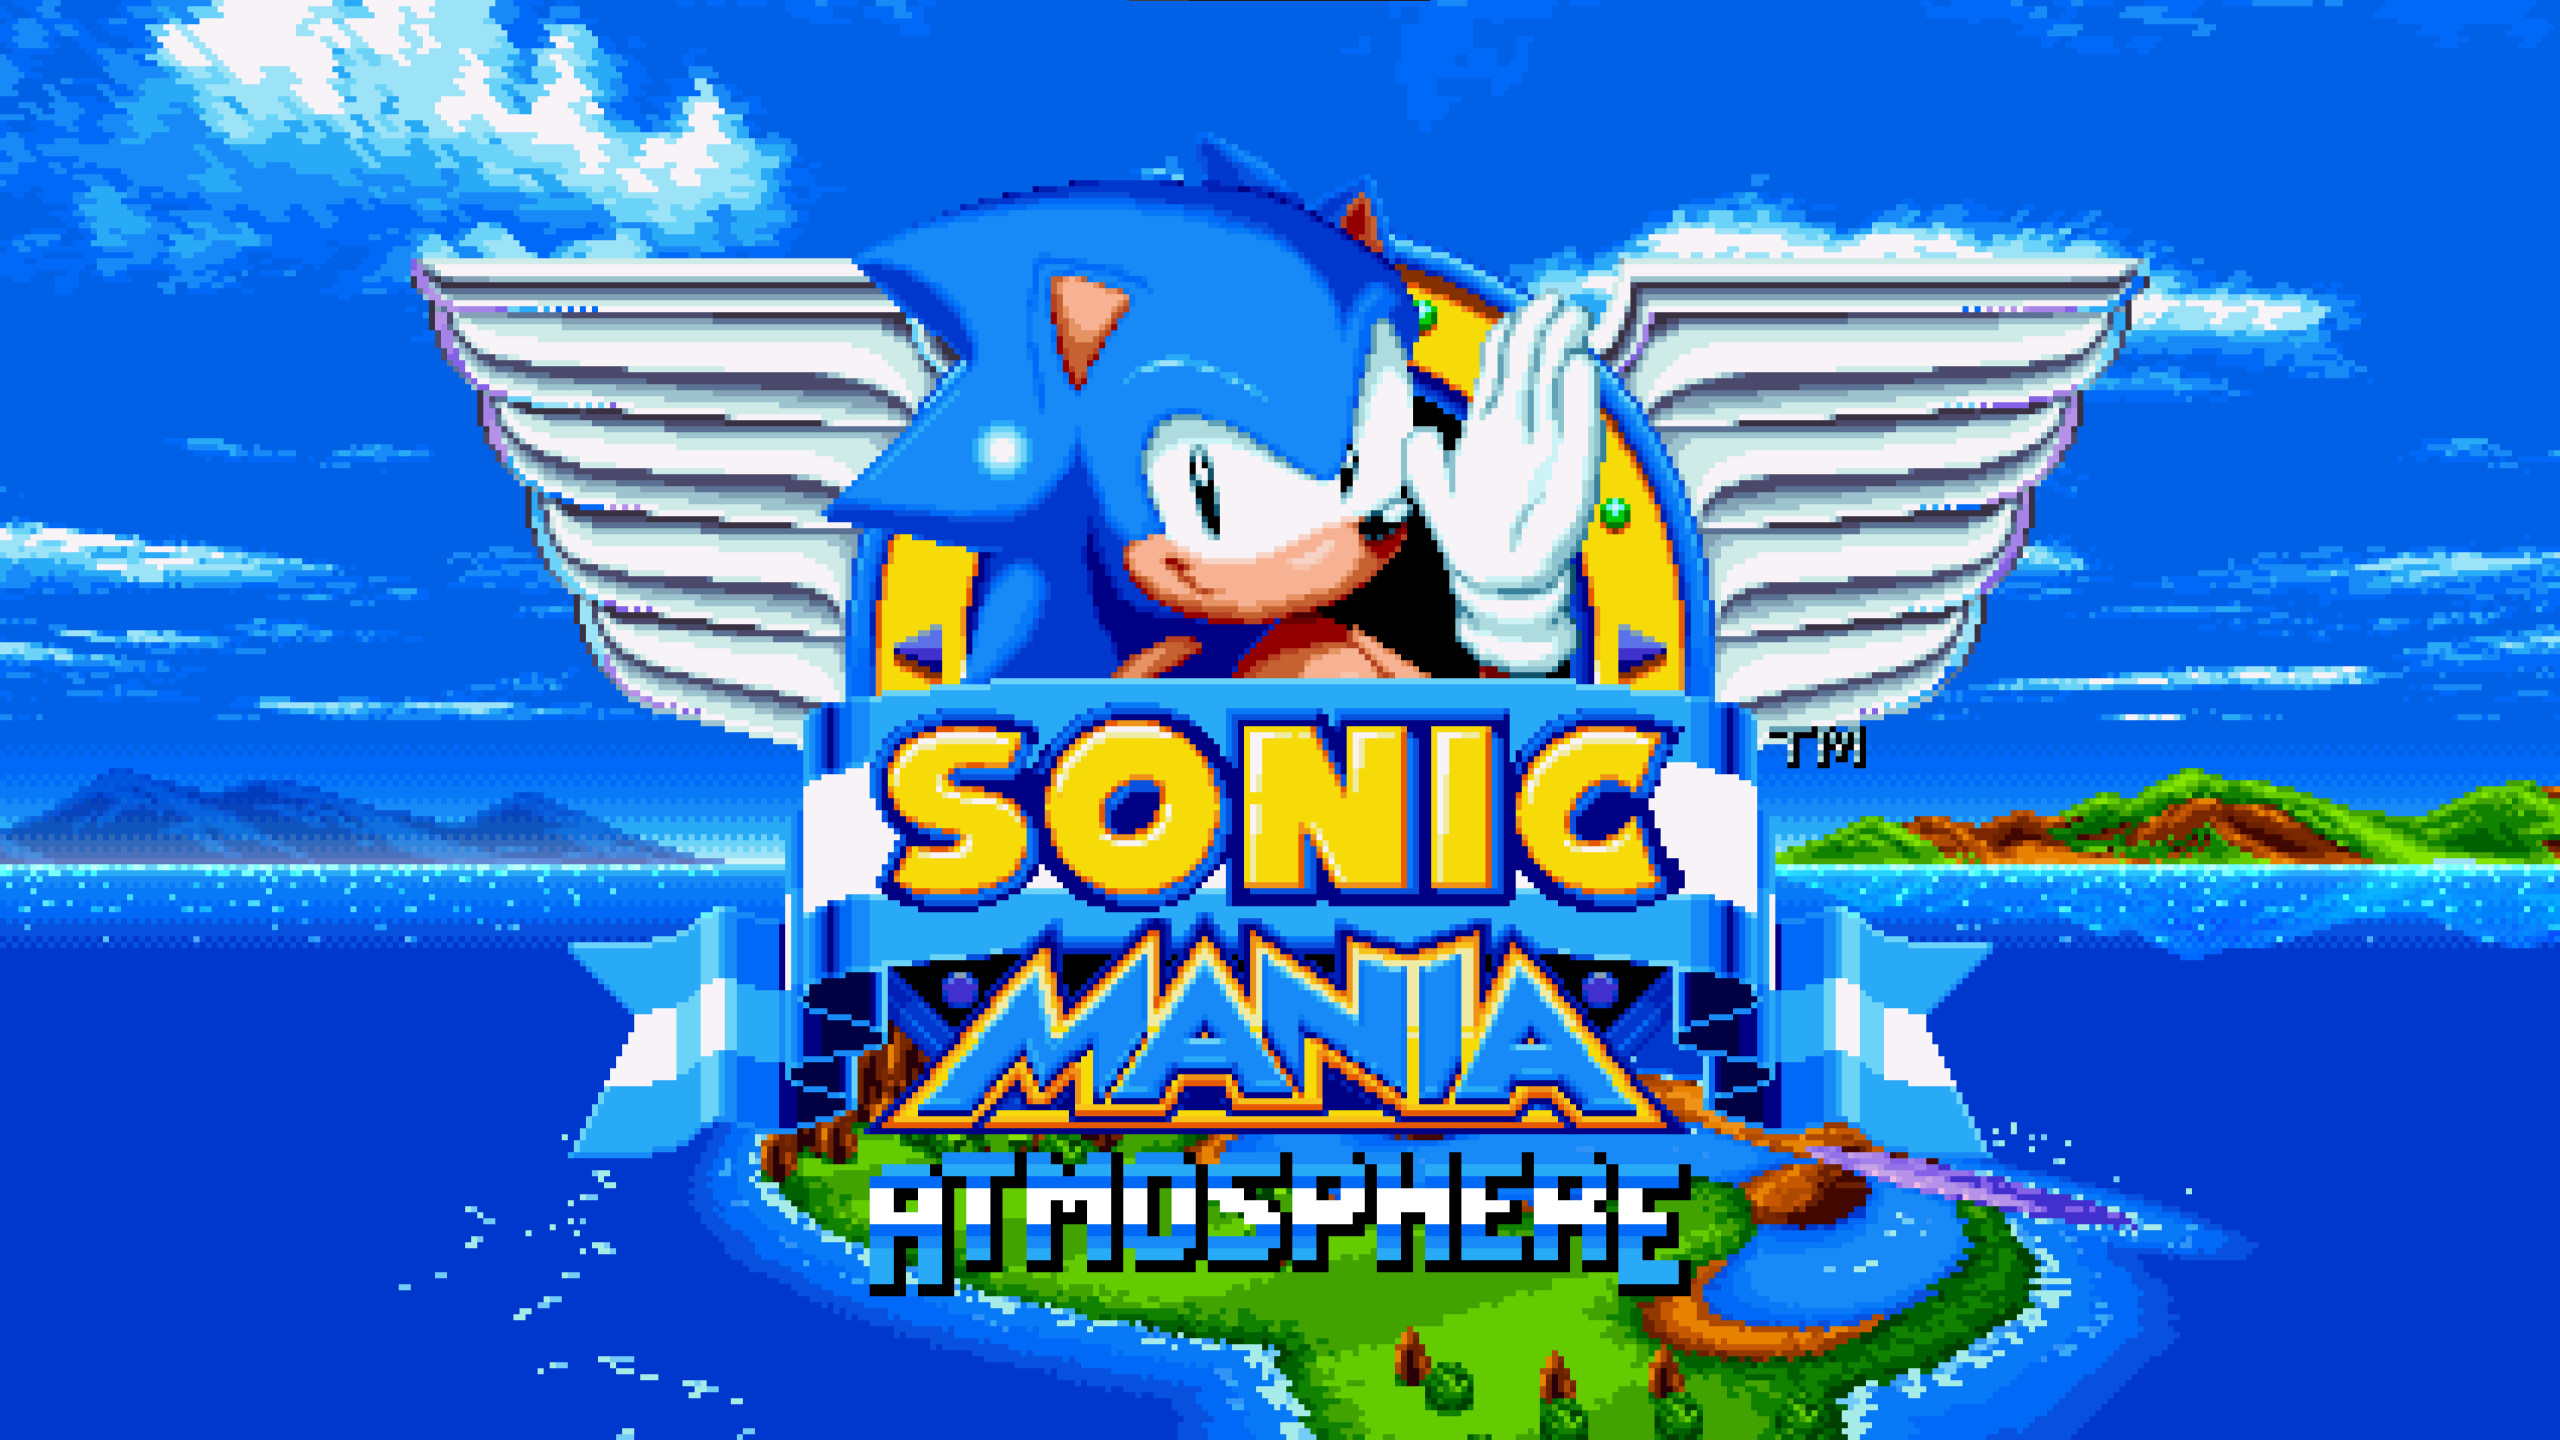 Sonic Mania Music: Super Sonic [extended] 